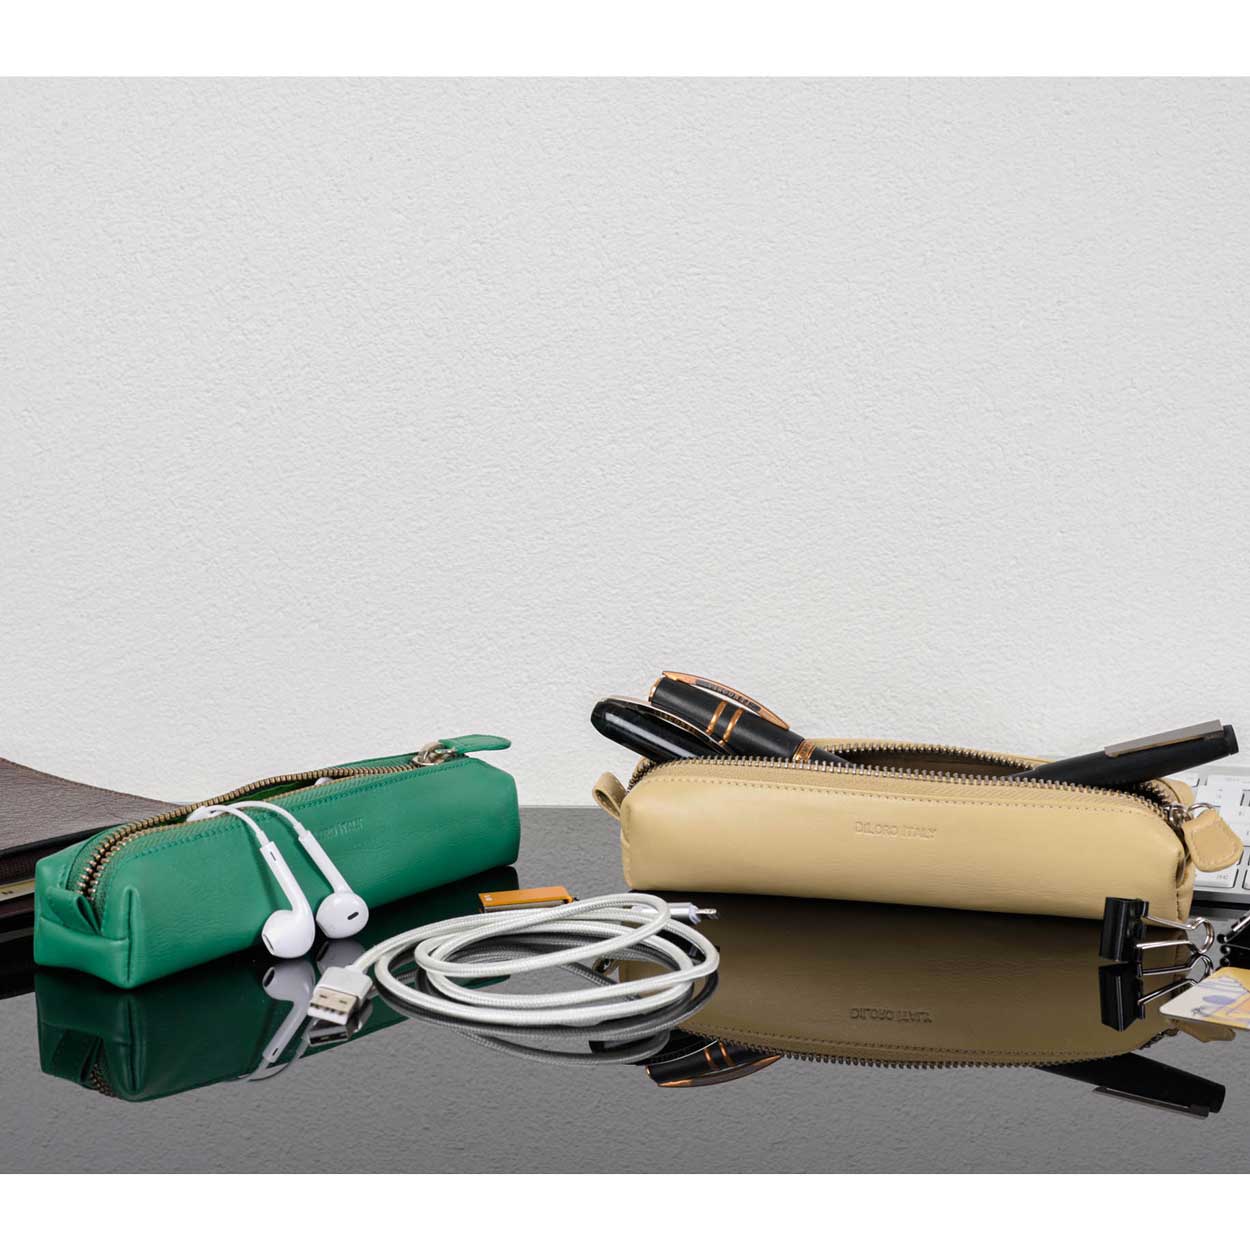 DiLoro Pen & Pencil Case: Color Light Green and Beige with YKK zippered pencil, pen case made from top quality, full grain nappa leather.